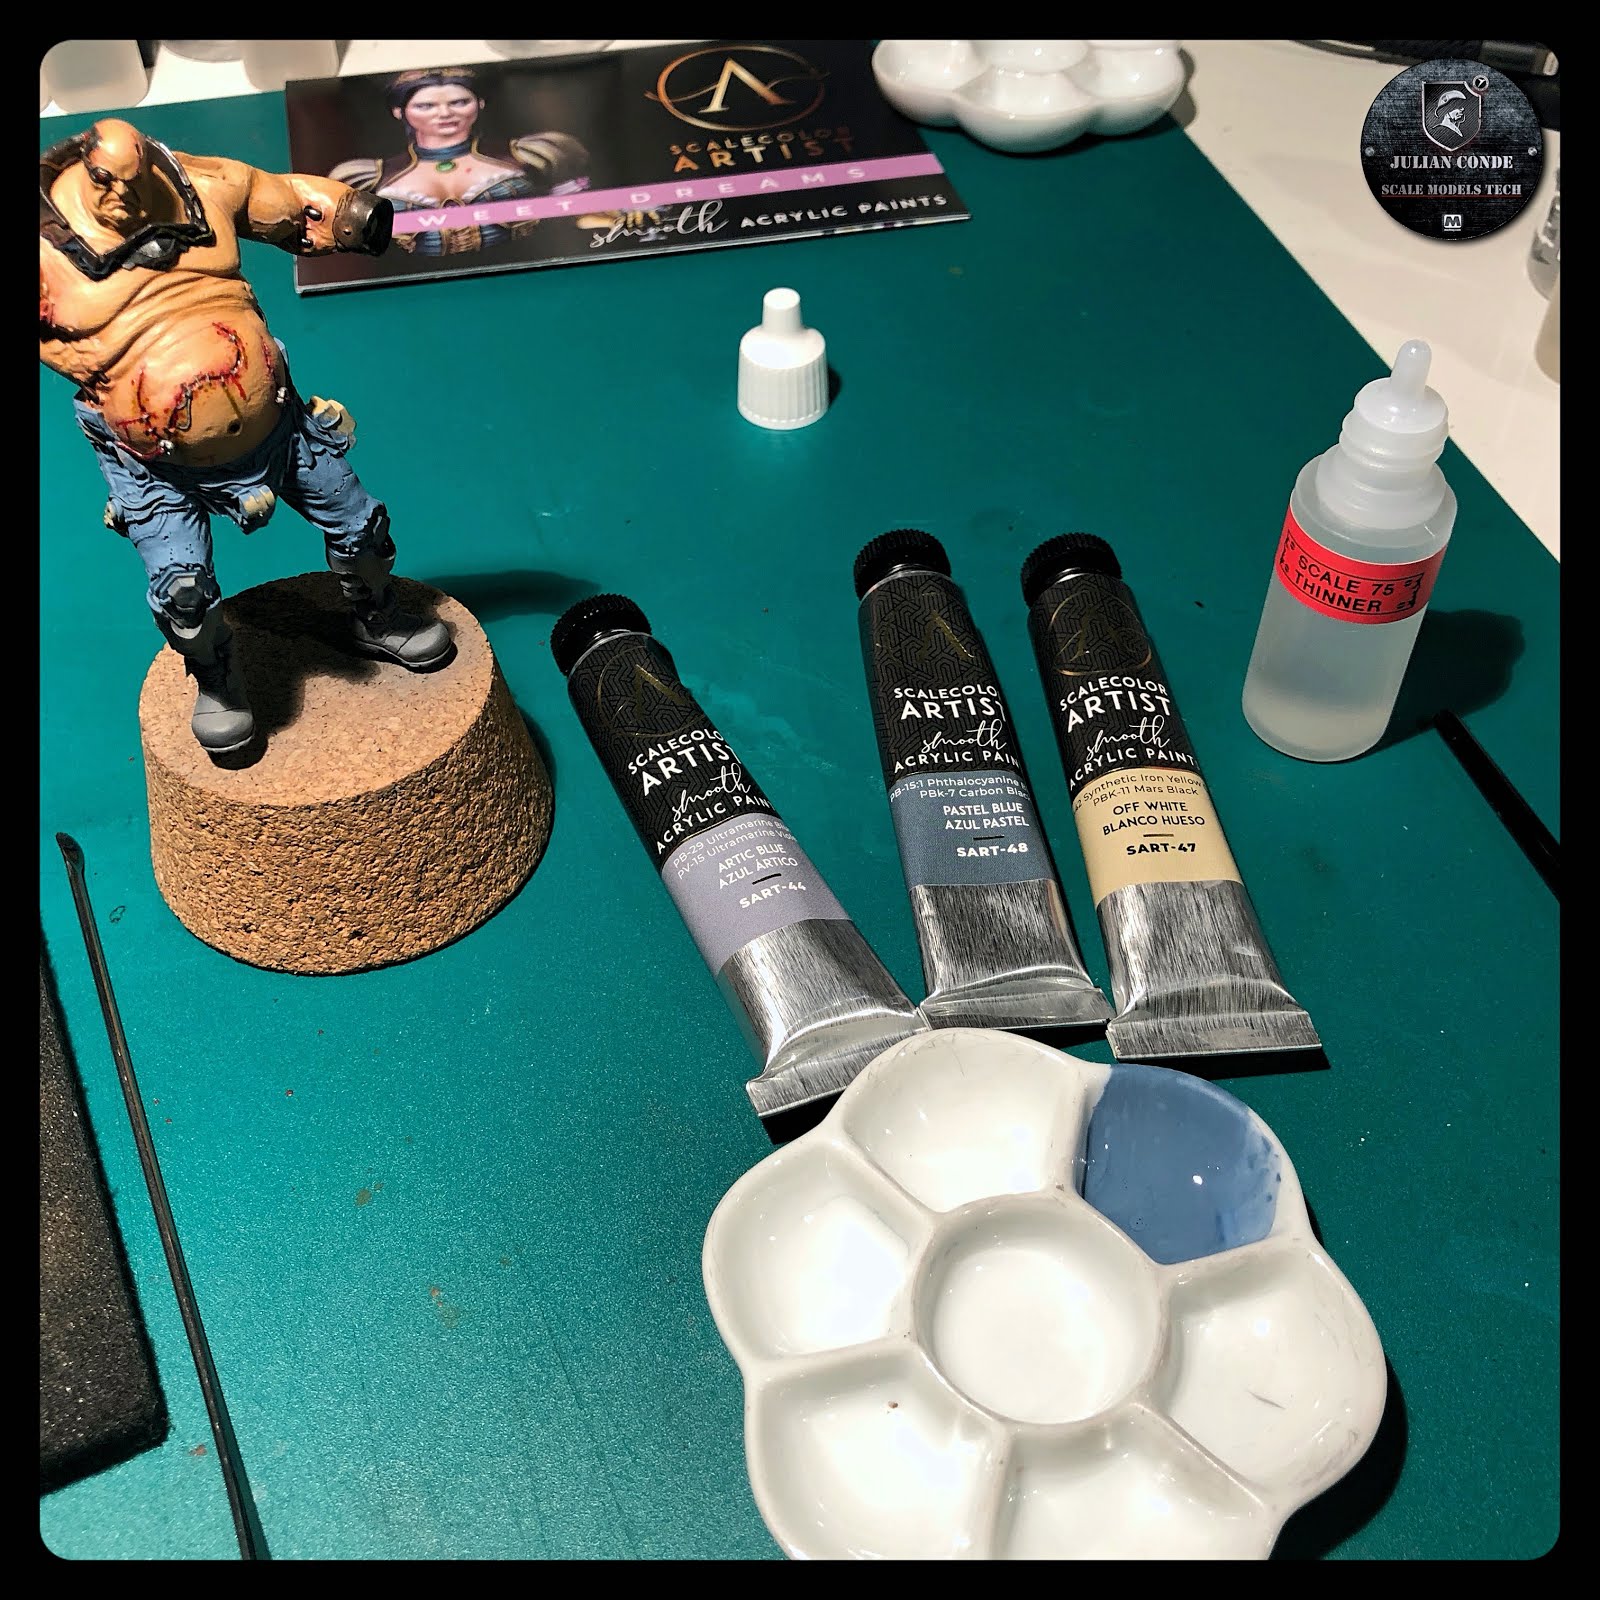 News From The Front: MichToy TRENCH RUNNER DISPATCH: WINSOR & NEWTON 7  SERIES BRUSHES The WORLD'S FINEST BRUSHES! by JULIAN CONDE